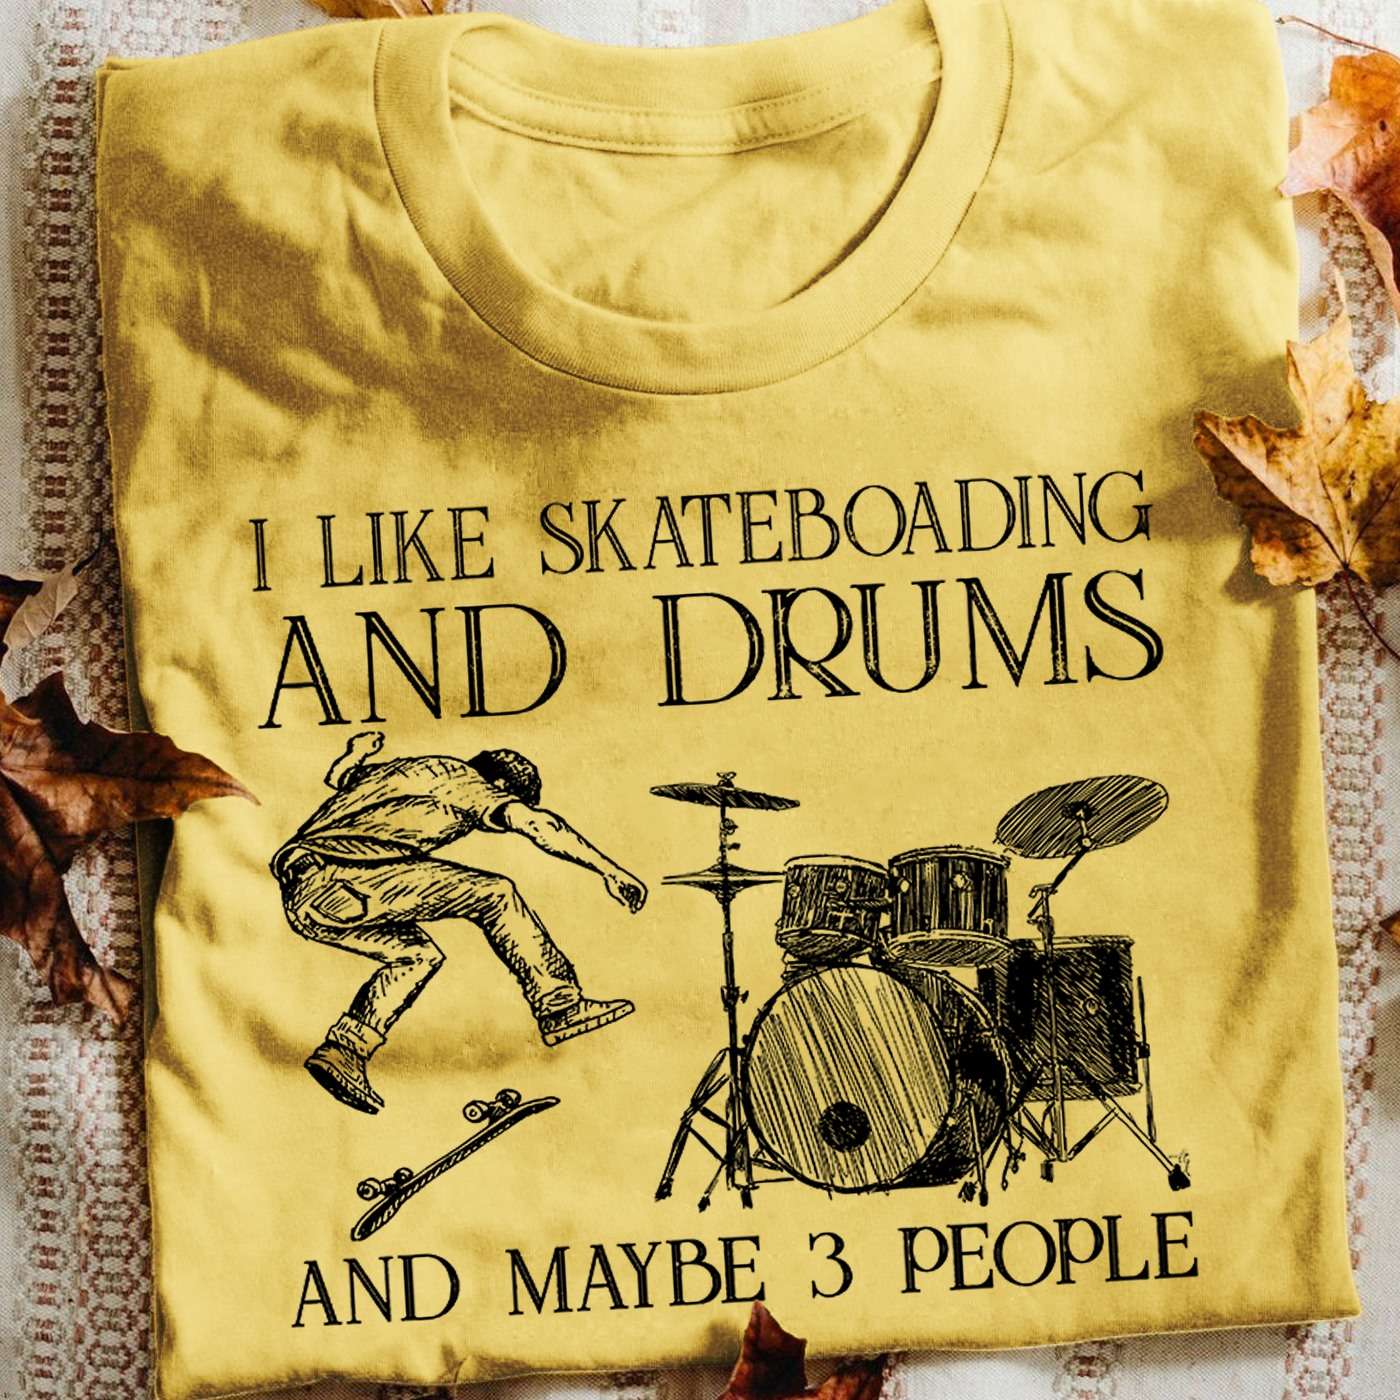 I like skateboarding and drums and maybe 3 people - The skater